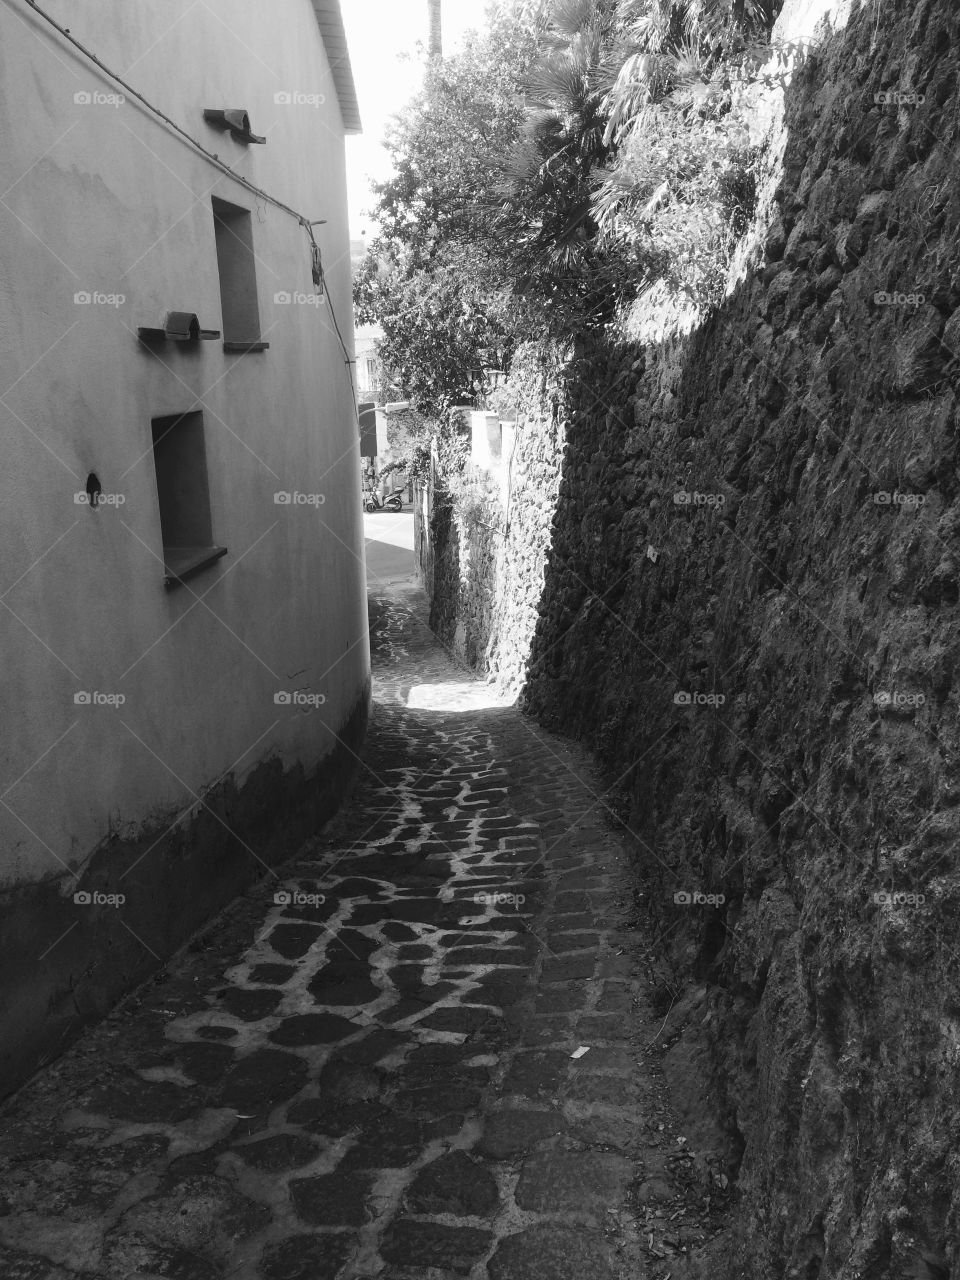 Tipical street of ischia